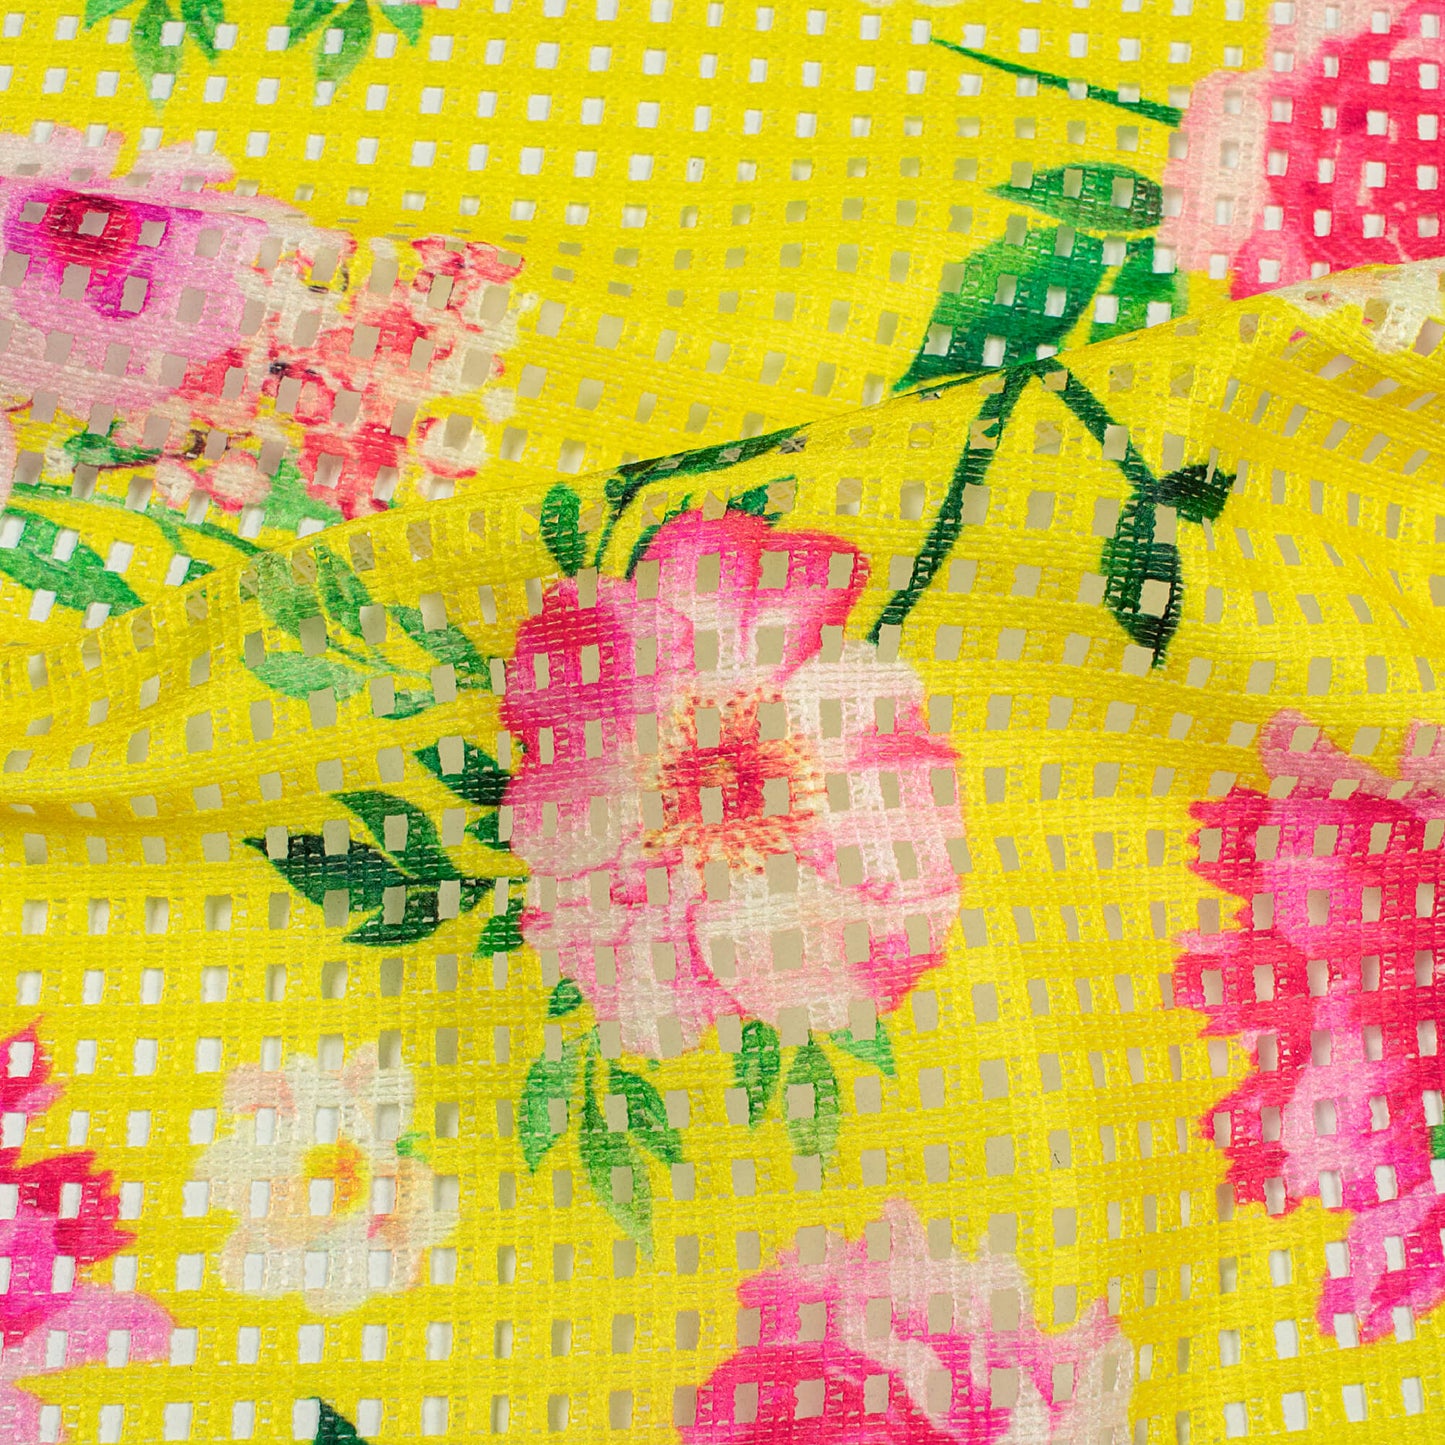 Bumblebee Yellow And Pink Floral Pattern Digital Print Checks Raschel Net Fabric (Width 58 Inches)